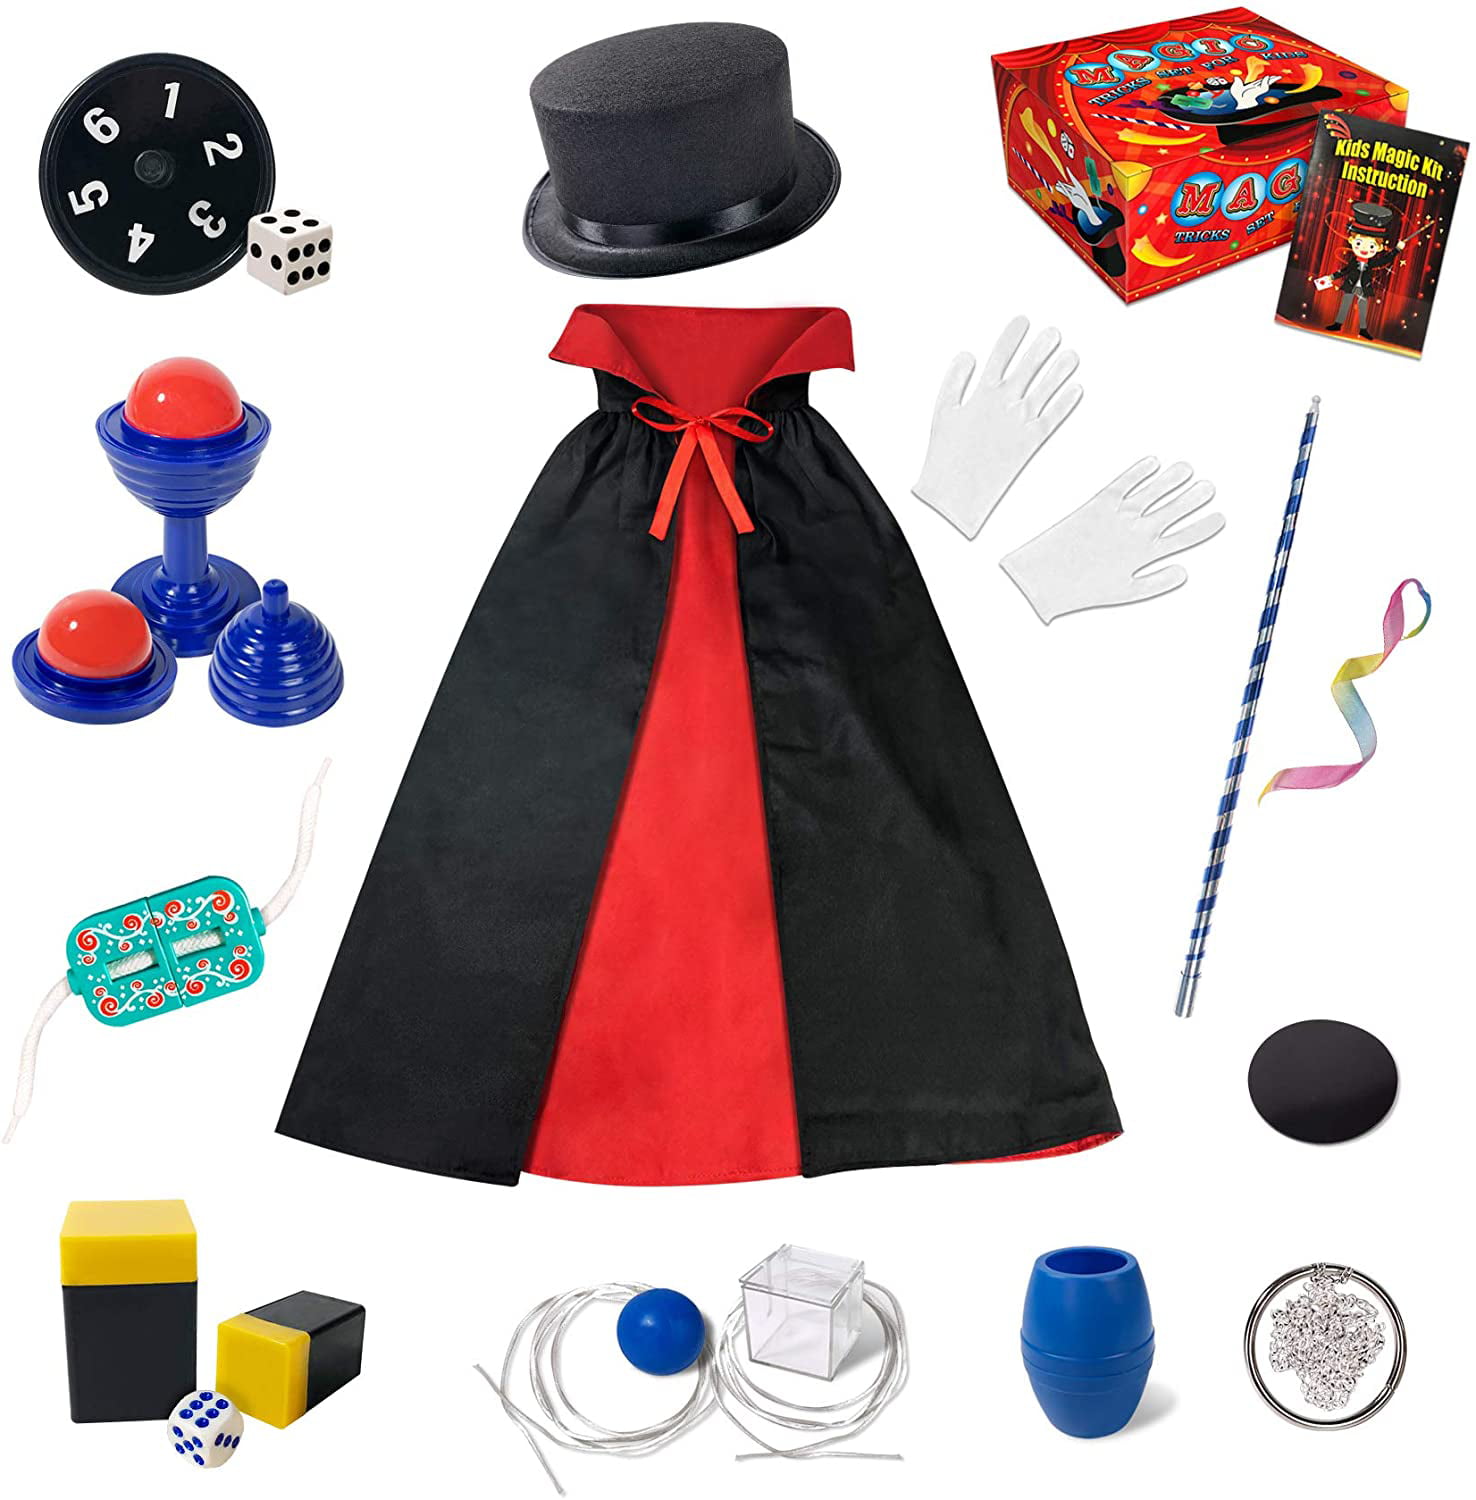 MasterMagic Magic Kit Ideal For Beginners and Kids of All Ages! Easy Magic Tricks For Children Learn Over 350 Spectacular Tricks With This Magic Set